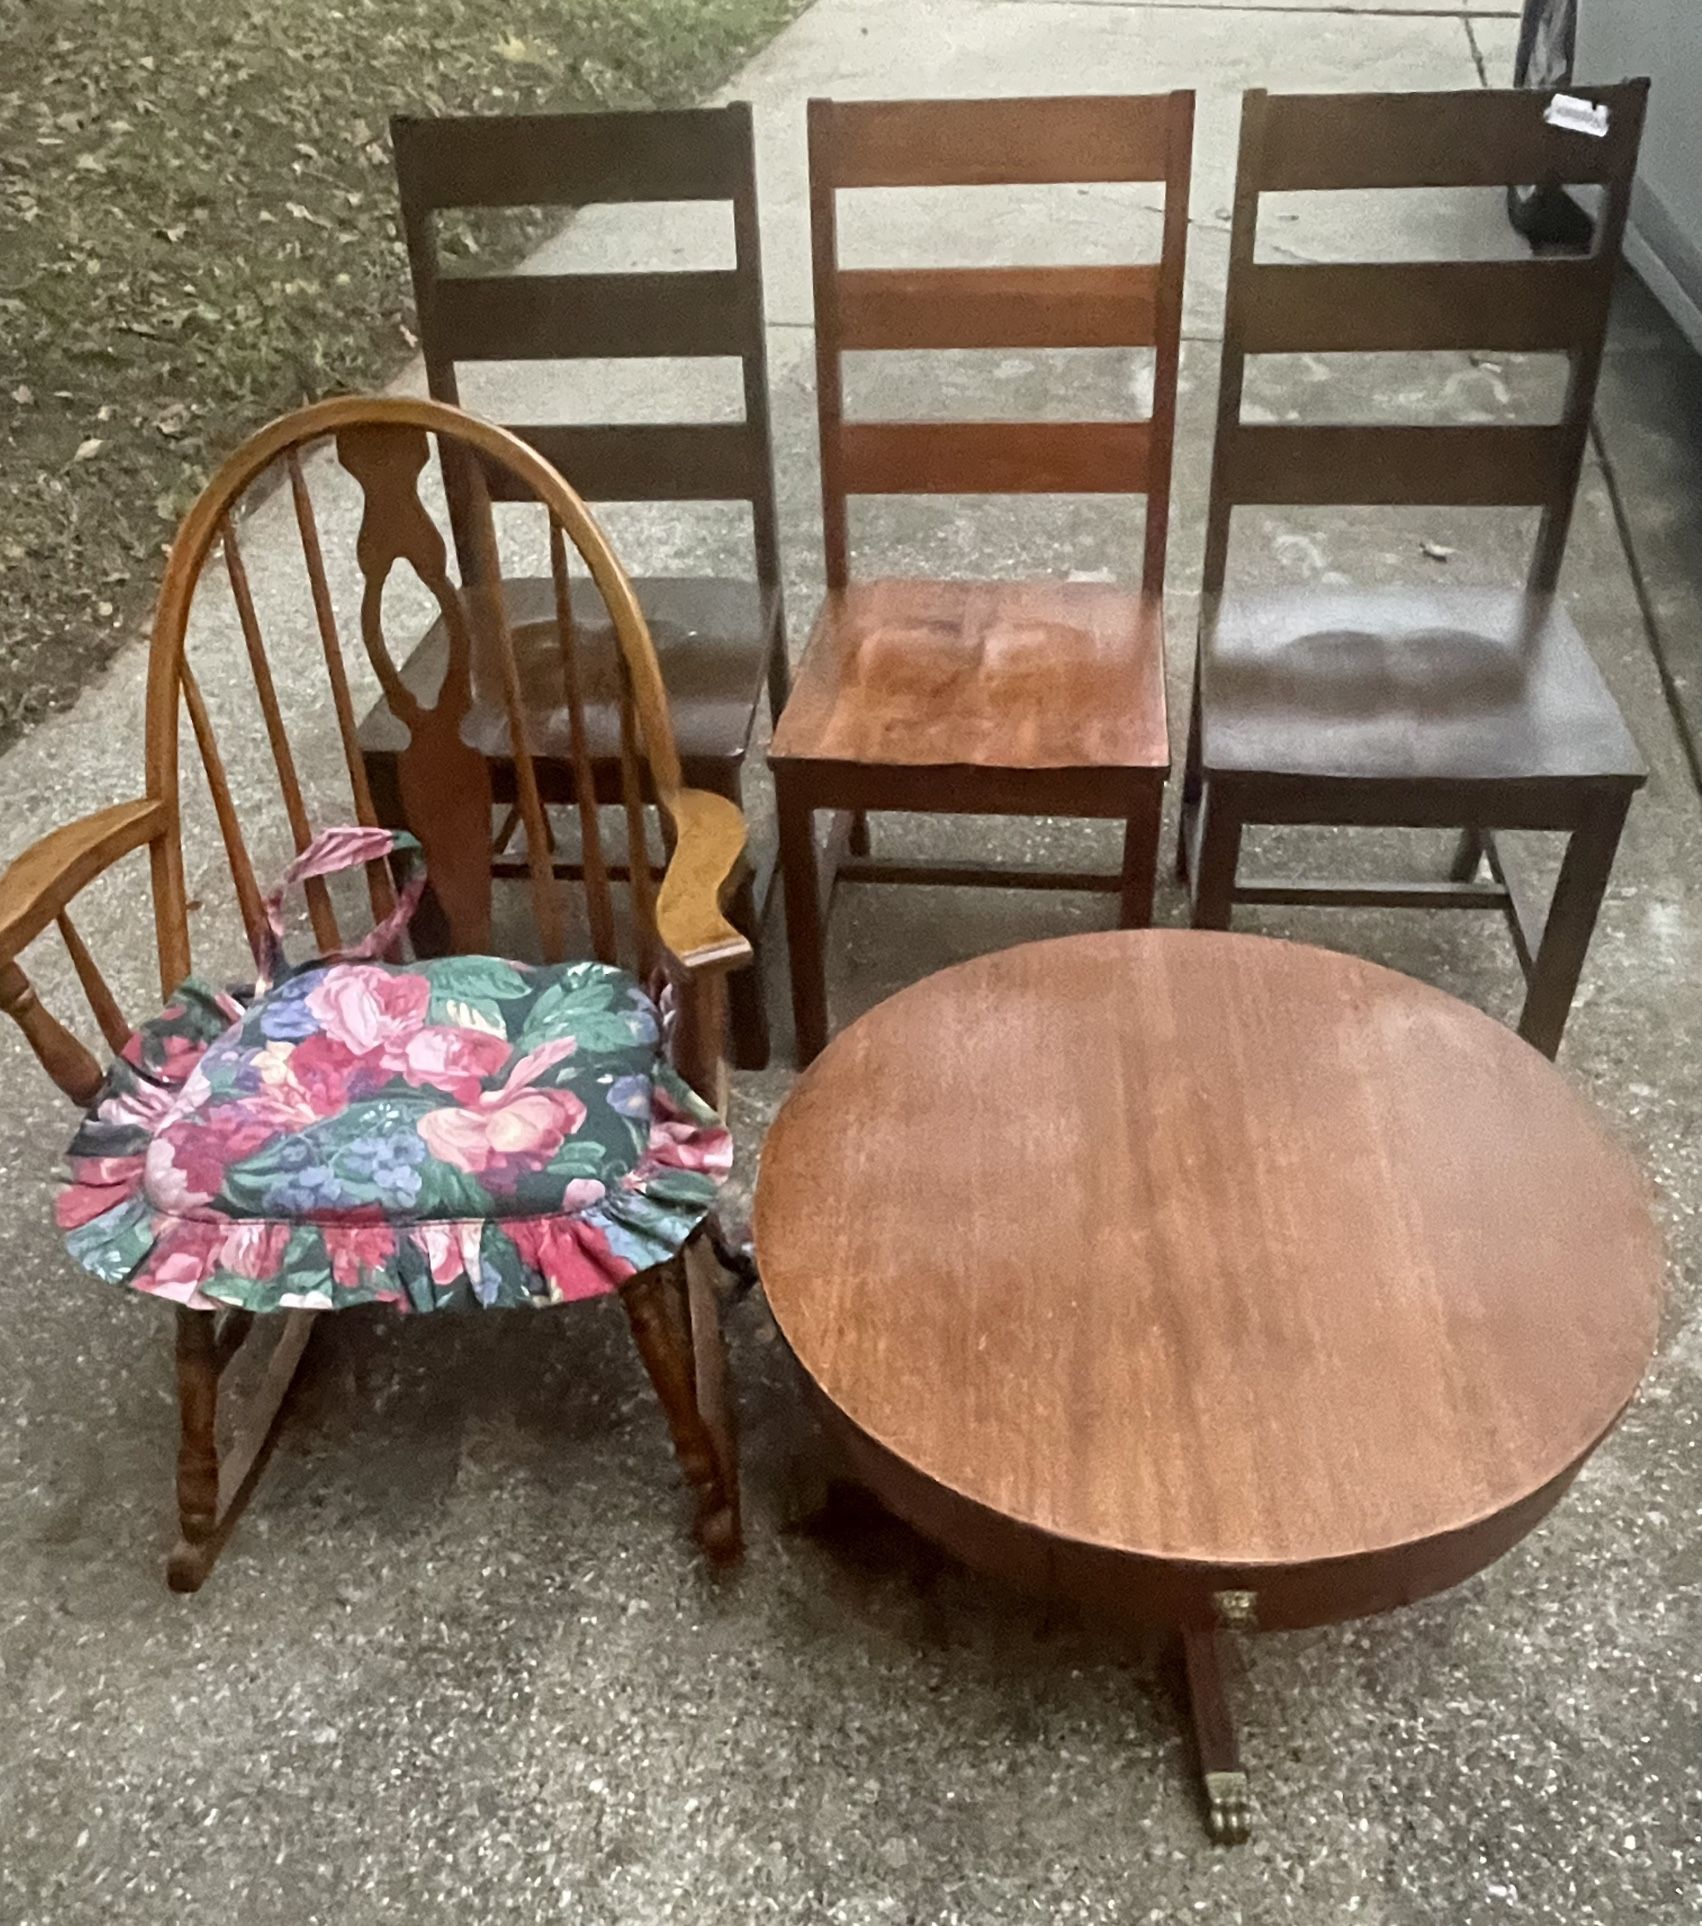 Furniture 3 Chairs & Rocking Chair / TABLE SOLD